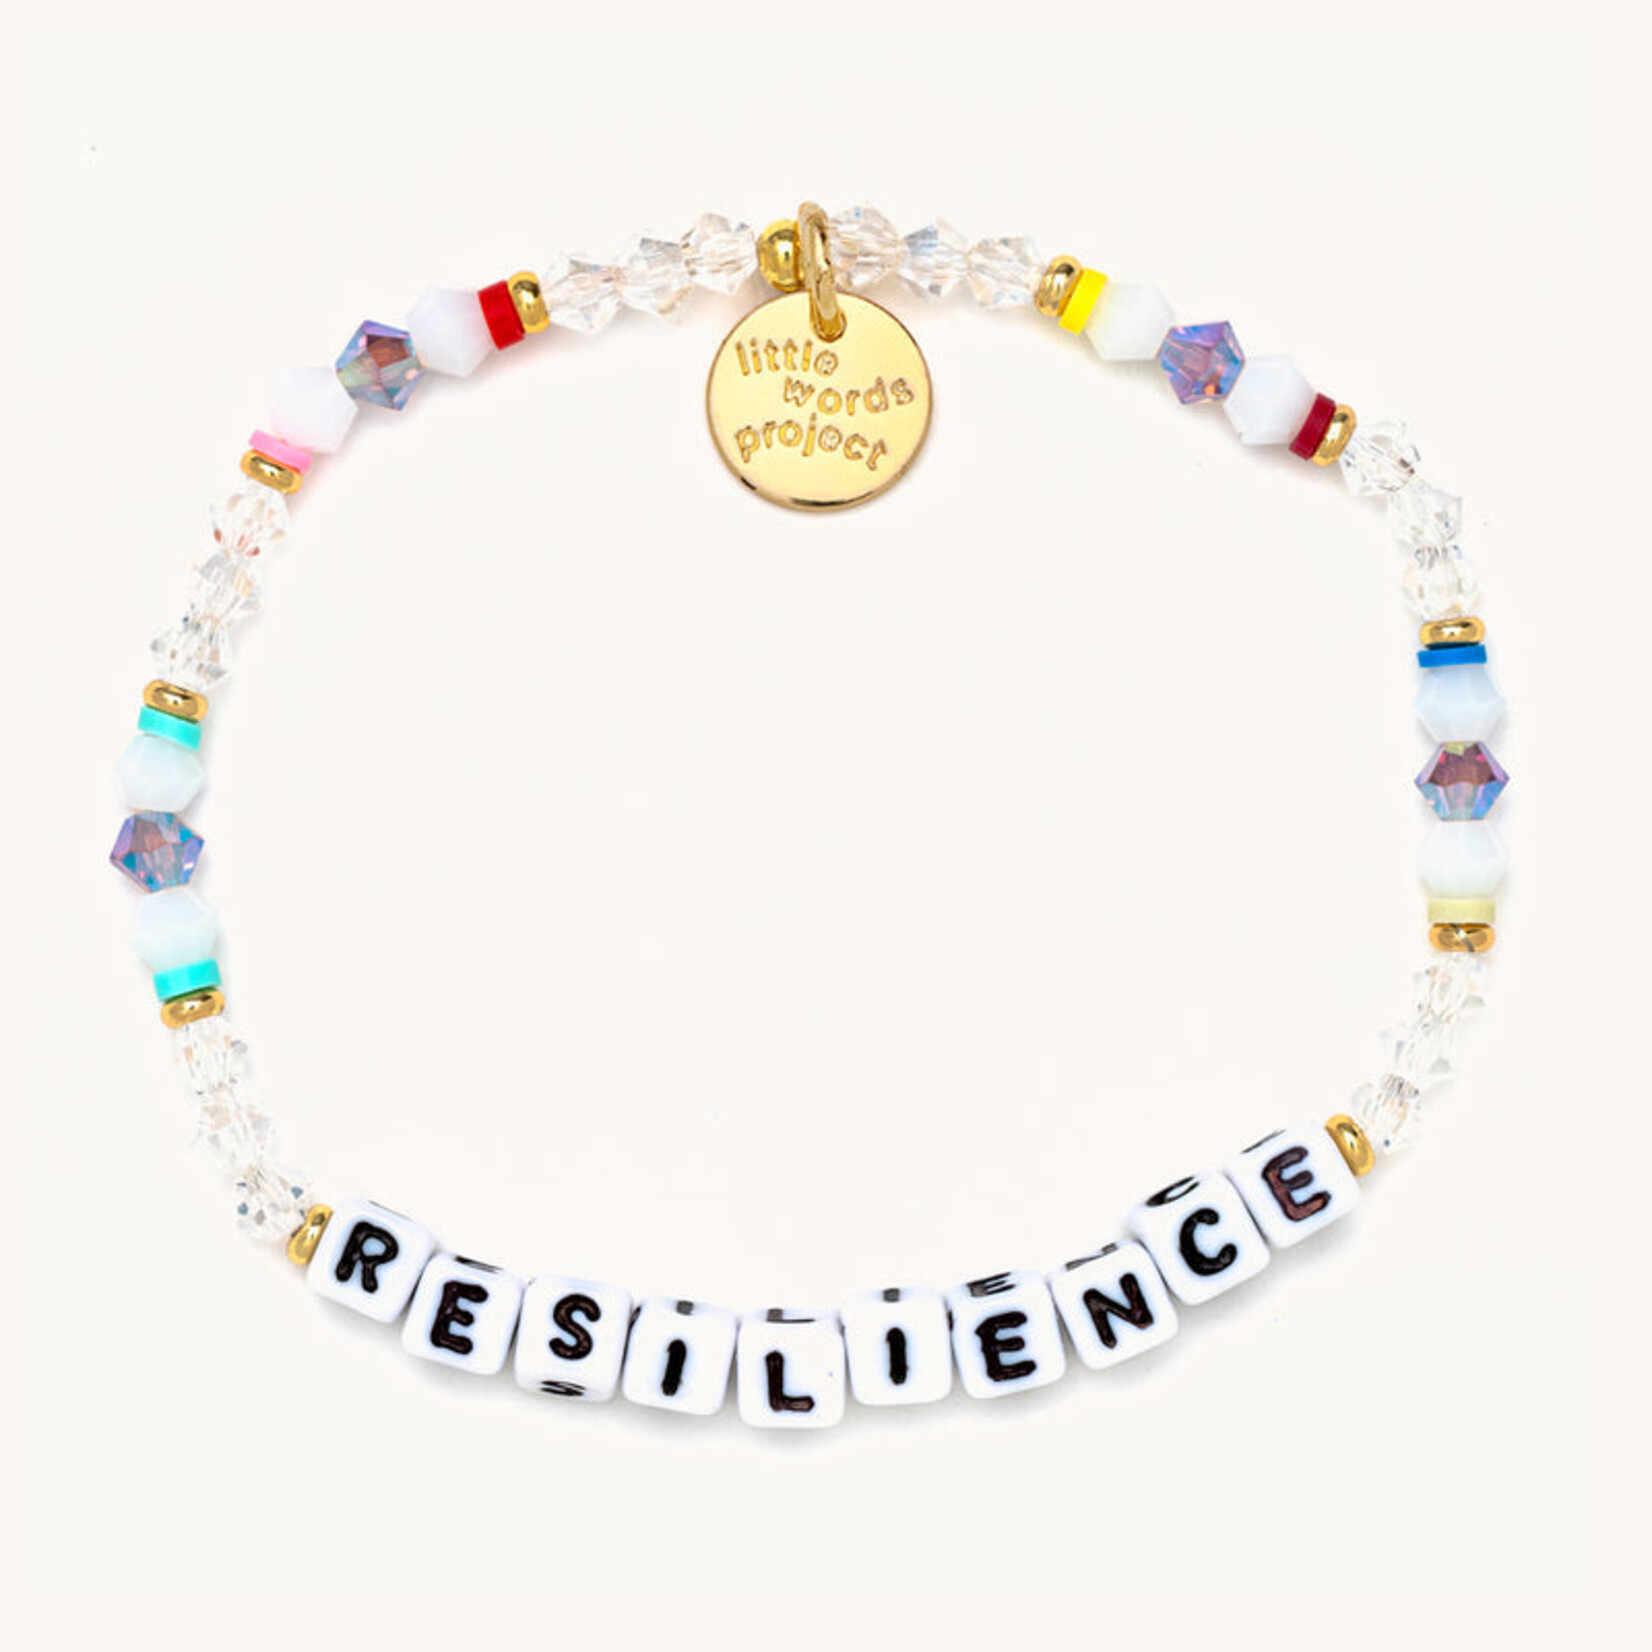 Little Words Project - Resilience - Radient